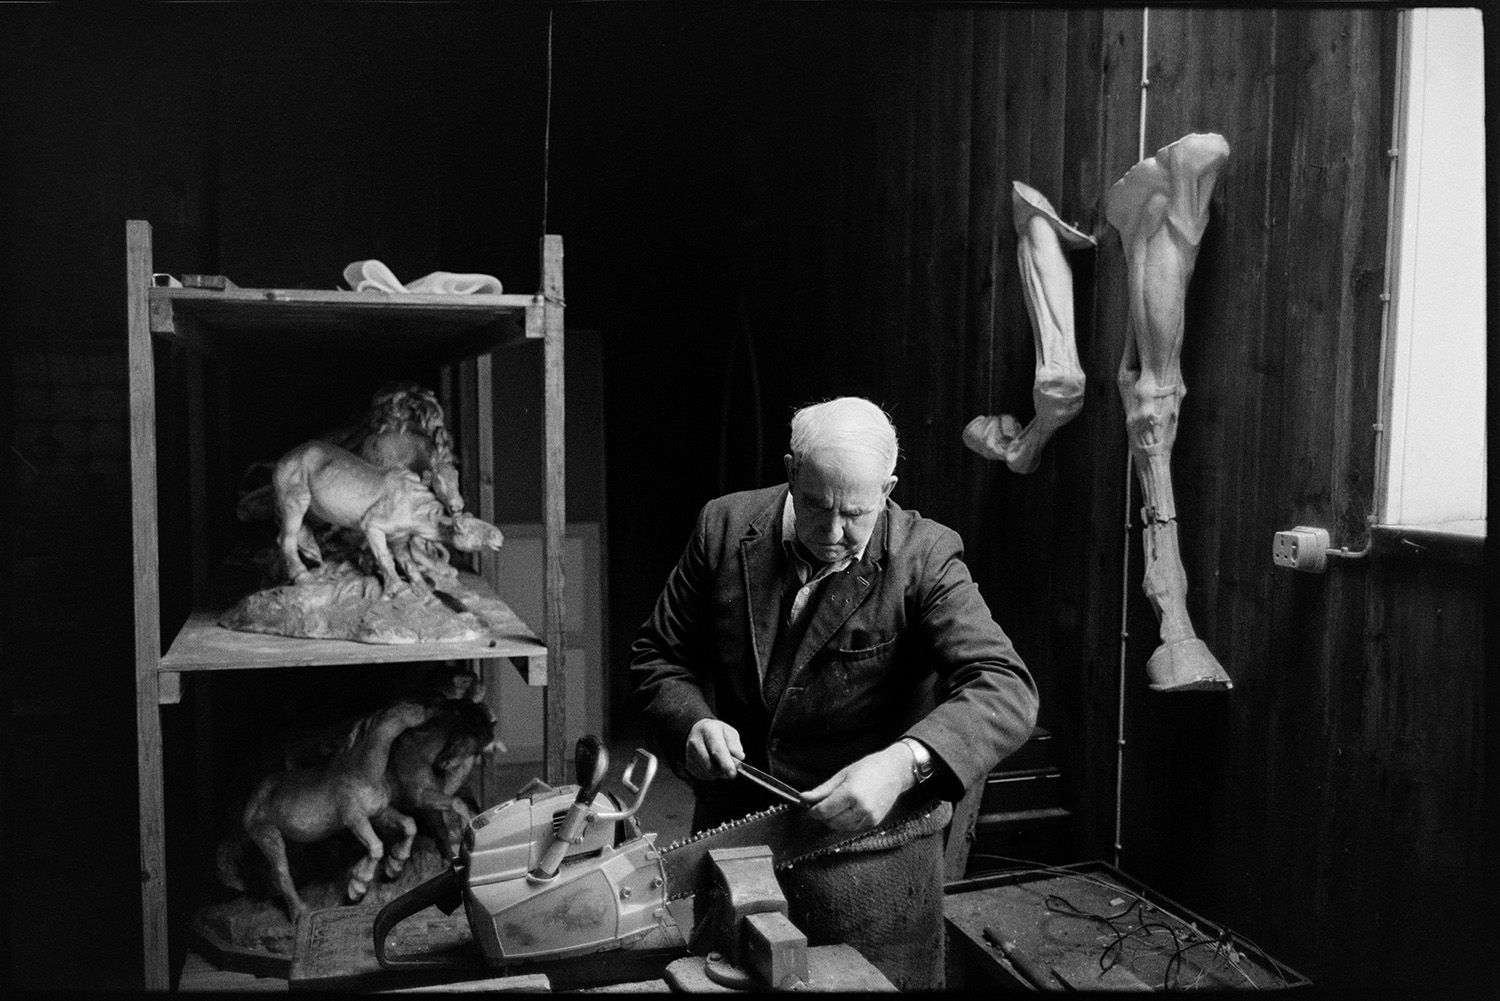 Man sharpening chainsaw in workshop, formerly sculptor's studio, with sculpture.
[Horace Baker sharpening a chainsaw, secured in a vice, in a workshop which was formerly a sculptor's studio, at Halsdon House near Dolton. Pieces of sculpture are displayed, including horses.]